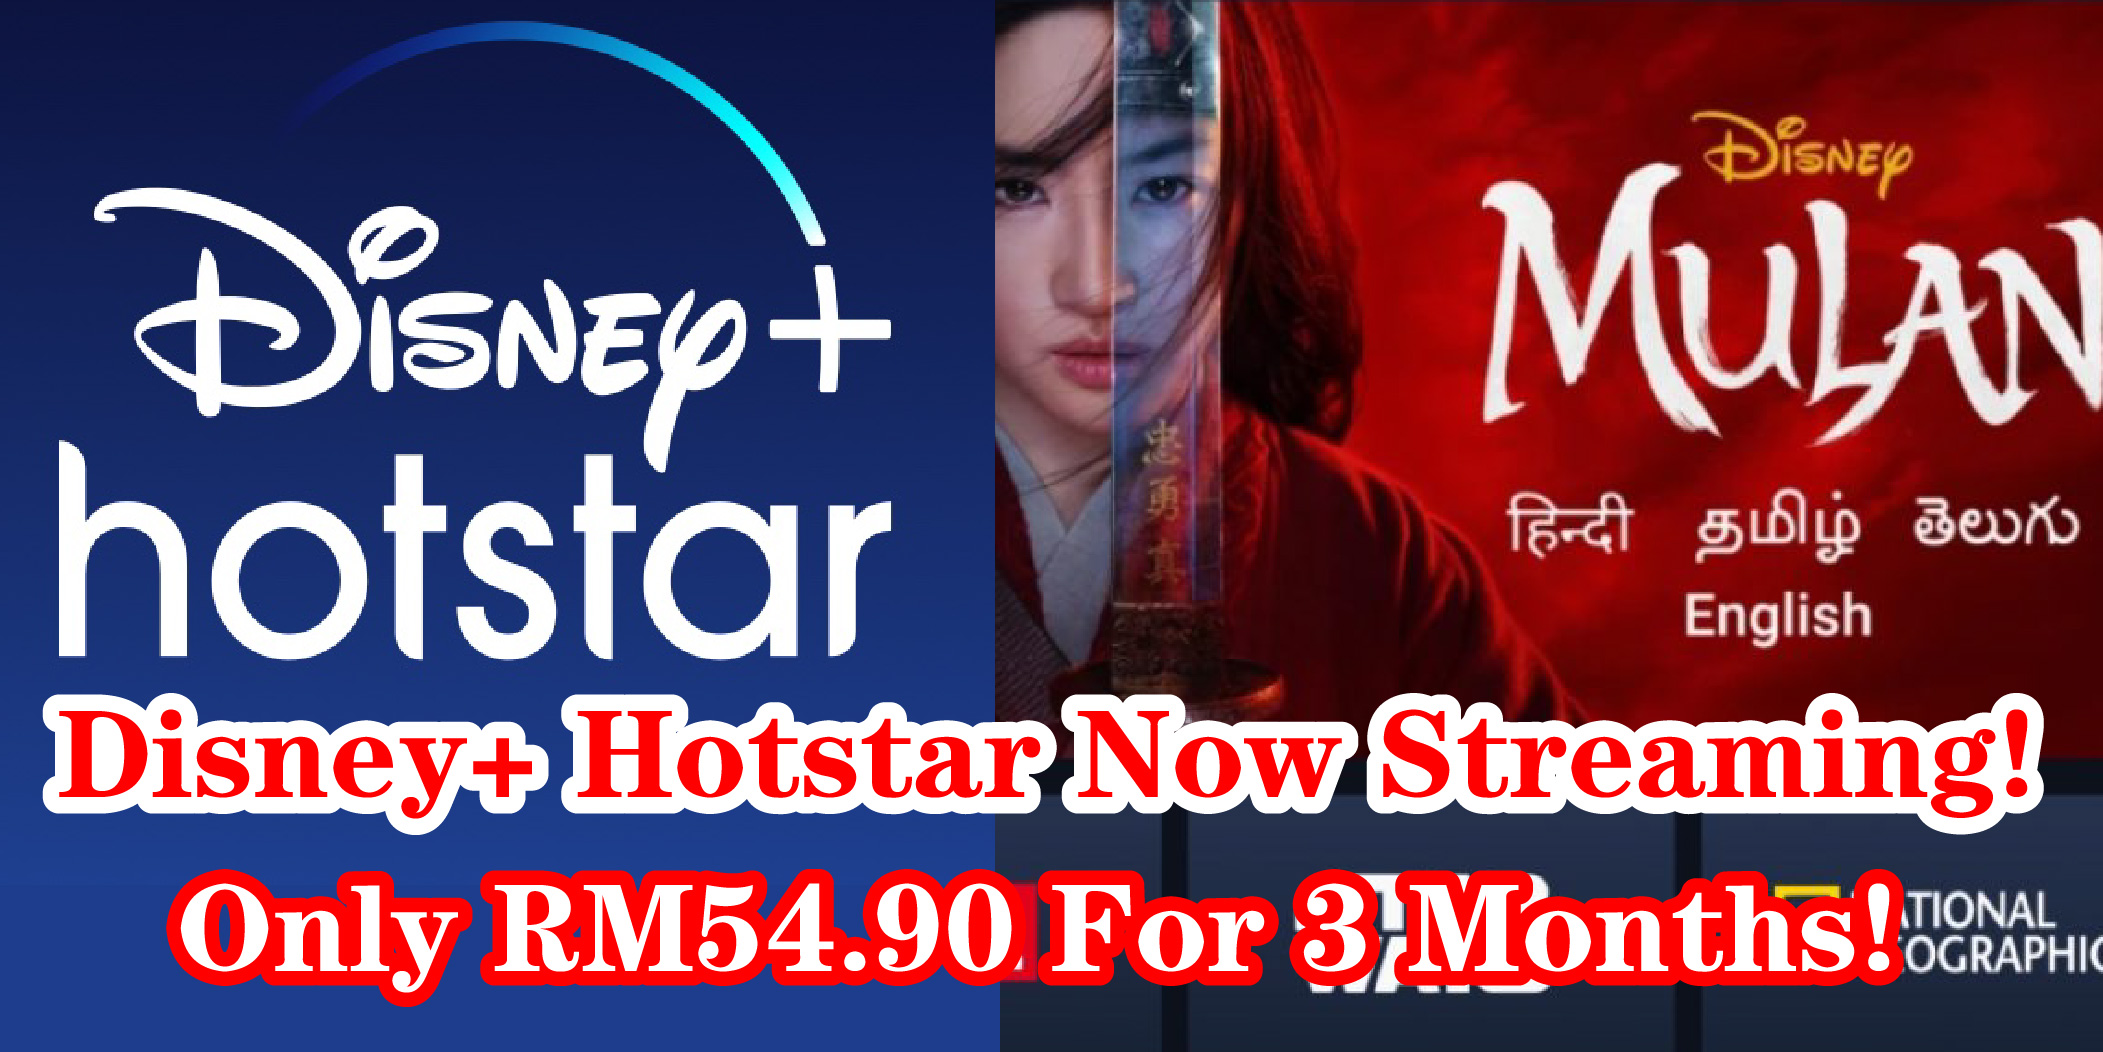 Disney+ Hotstar is Now Live! ? Over 800 Films and 18,000 Episodes of Popular TV Series from Disney? Costs Only RM54.90 for 3 Months! 】